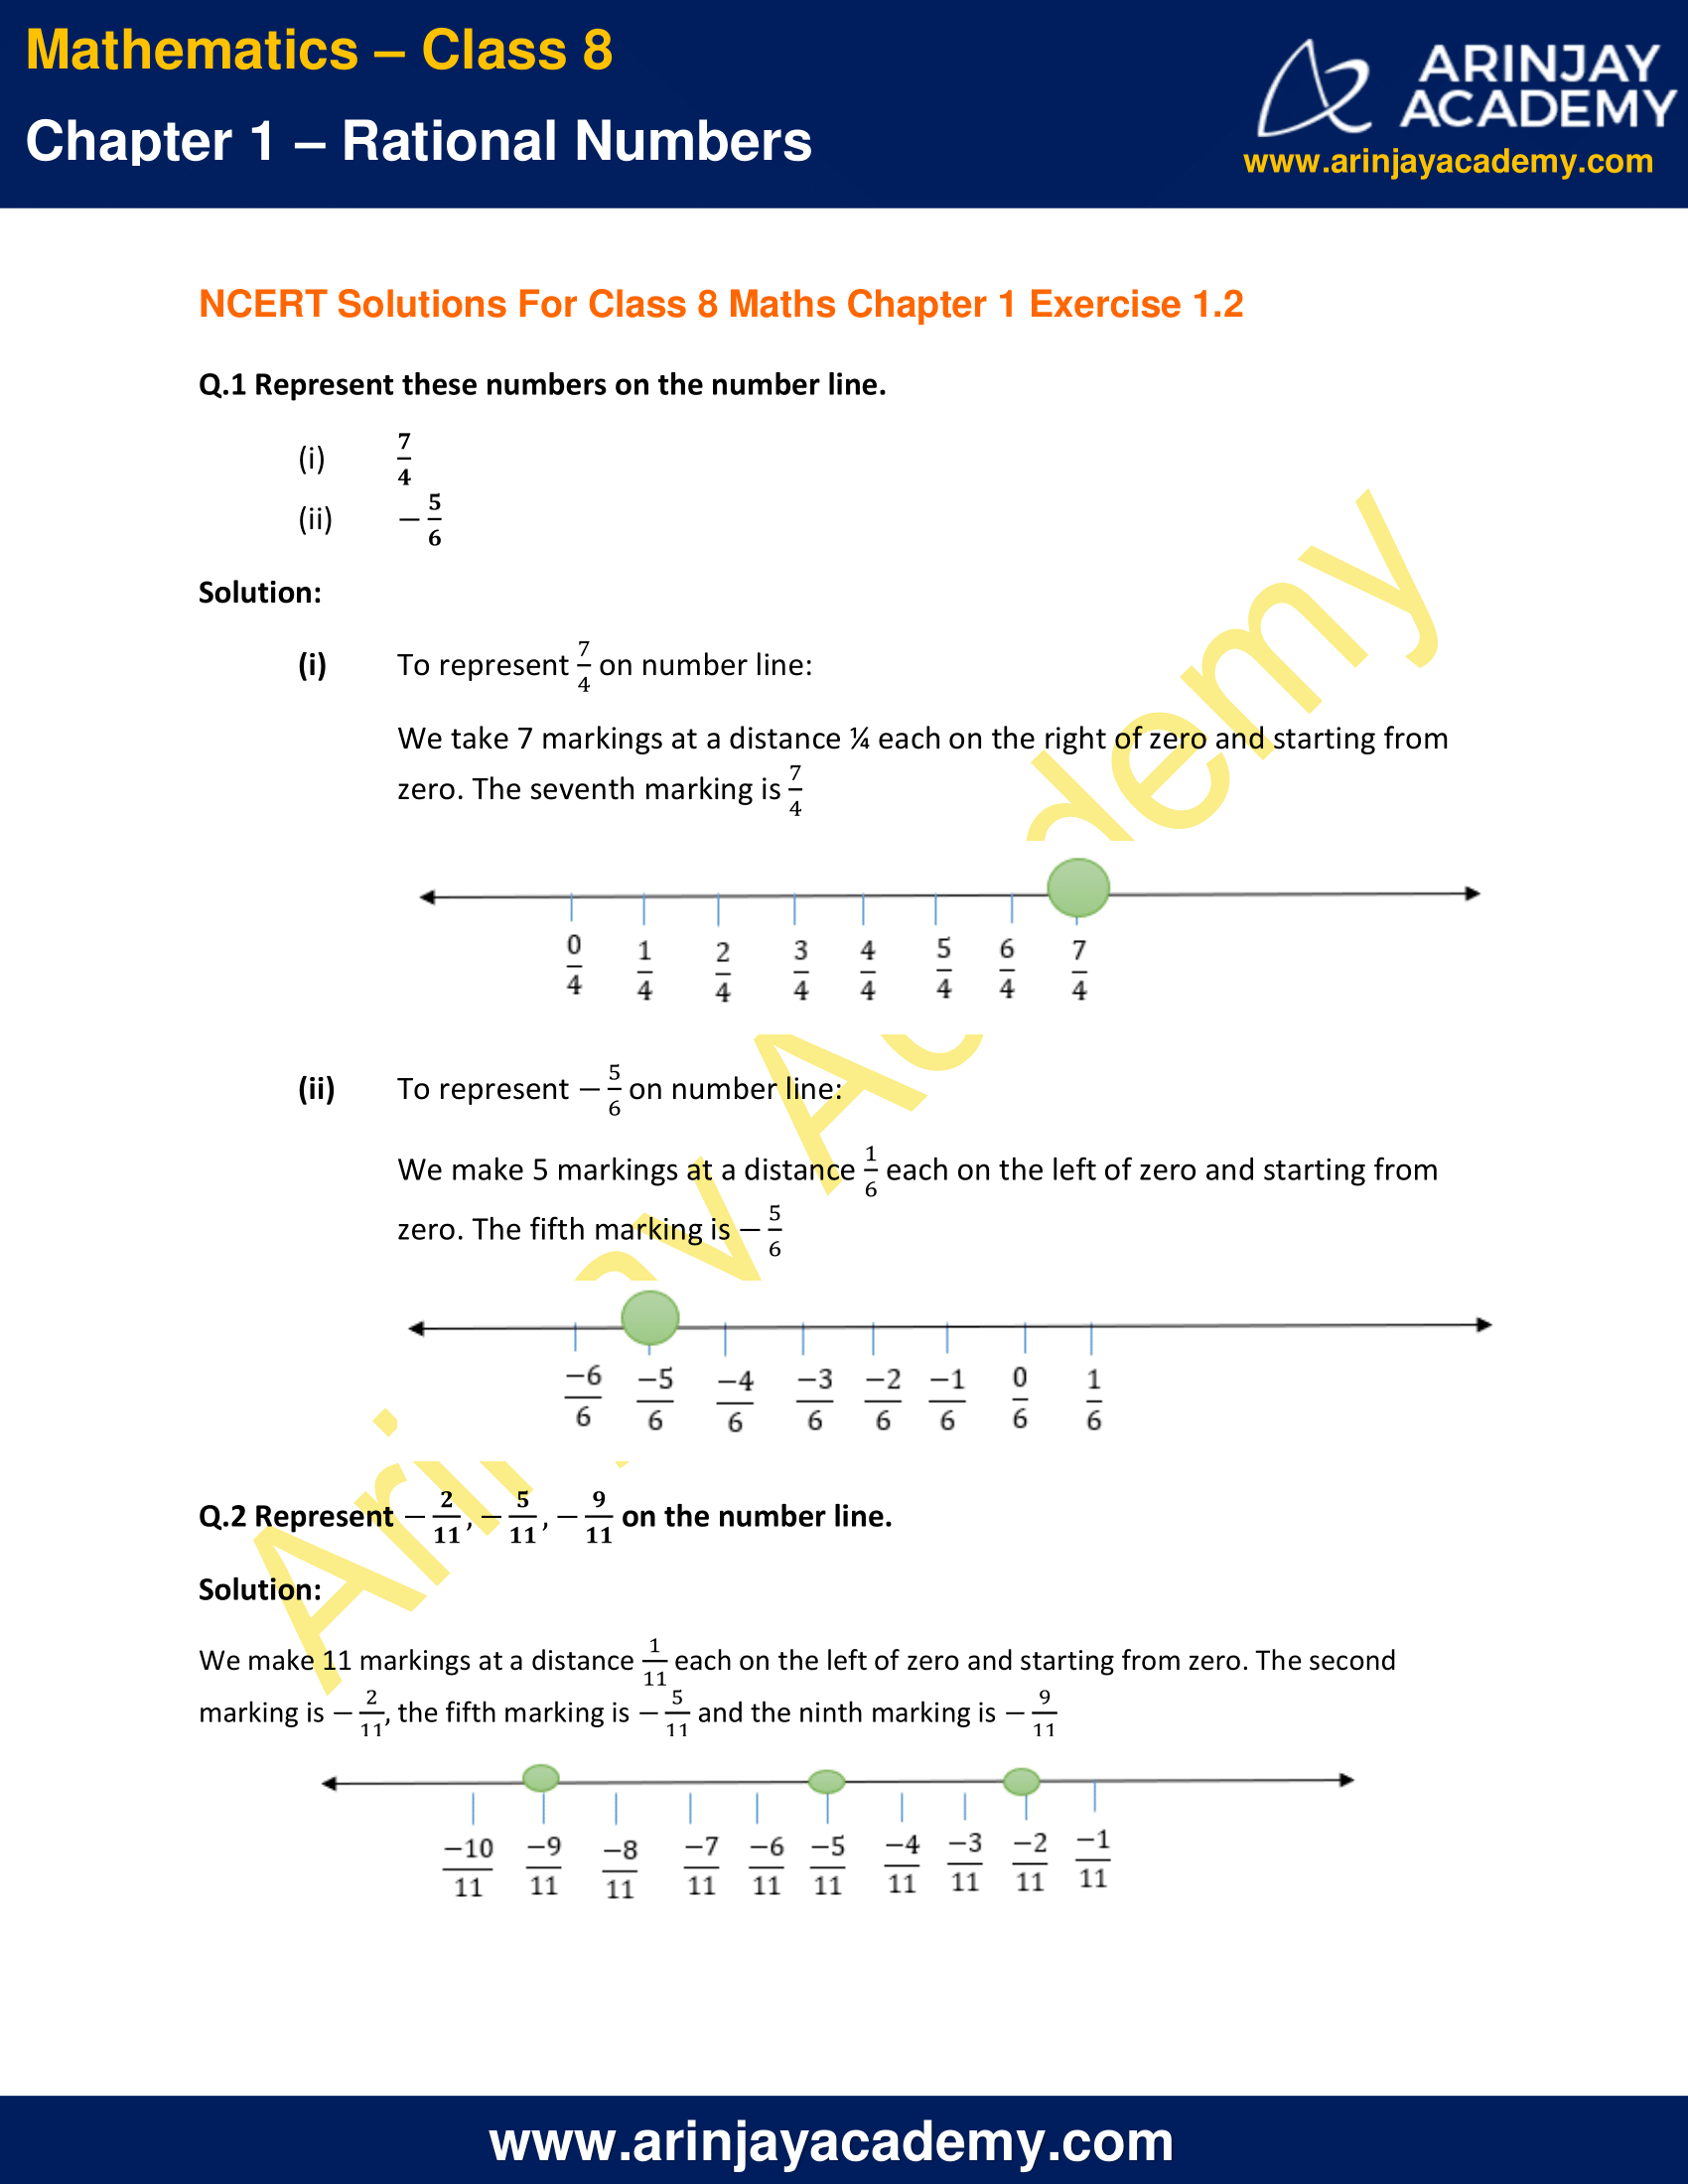 NCERT Solutions for Class 8 Maths Chapter 1 Exercise 1.2 image 1